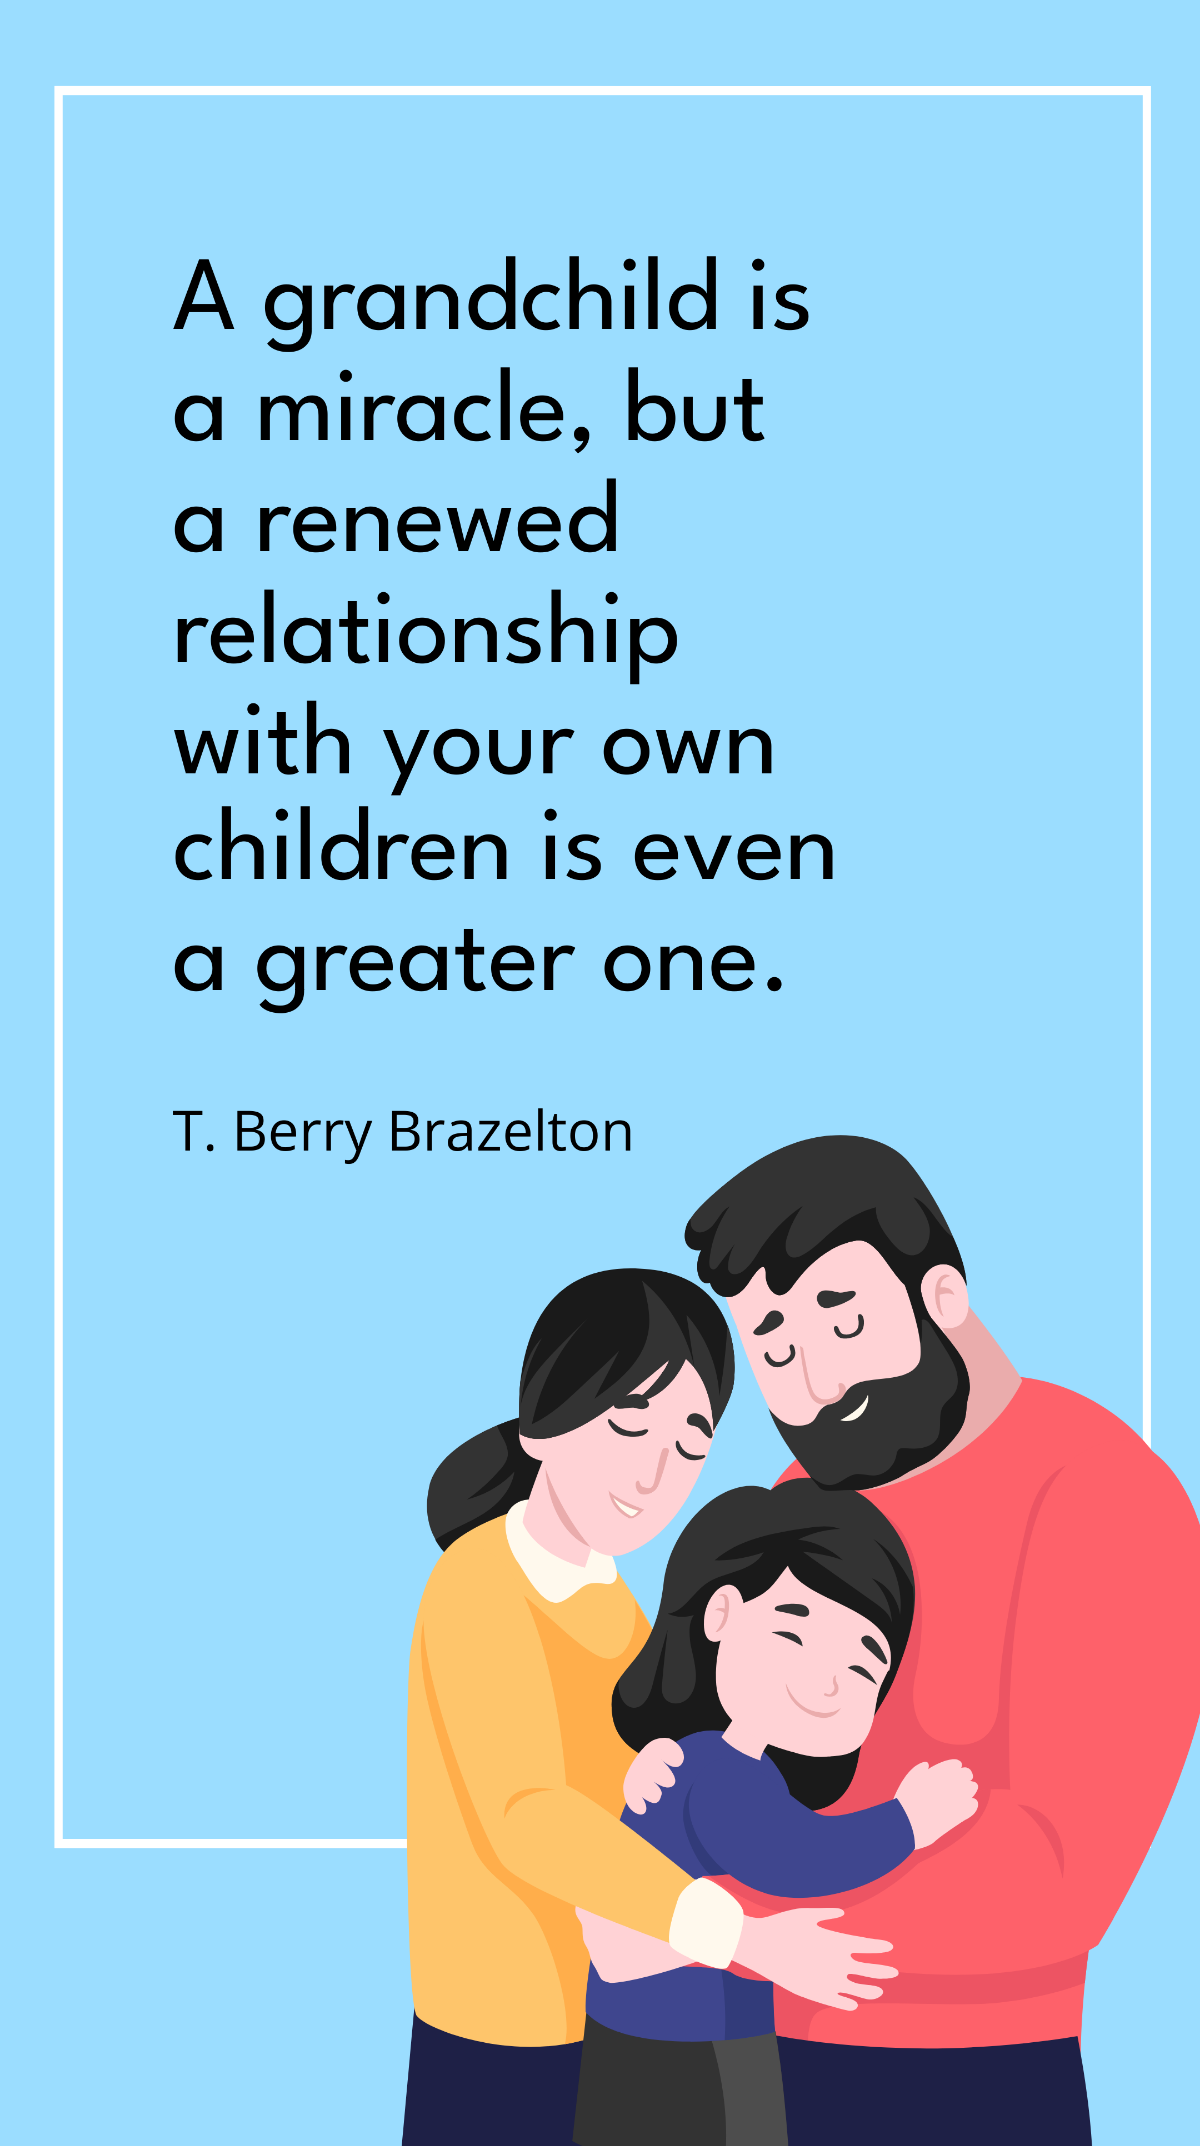 T. Berry Brazelton - A grandchild is a miracle, but a renewed relationship with your own children is even a greater one. Template